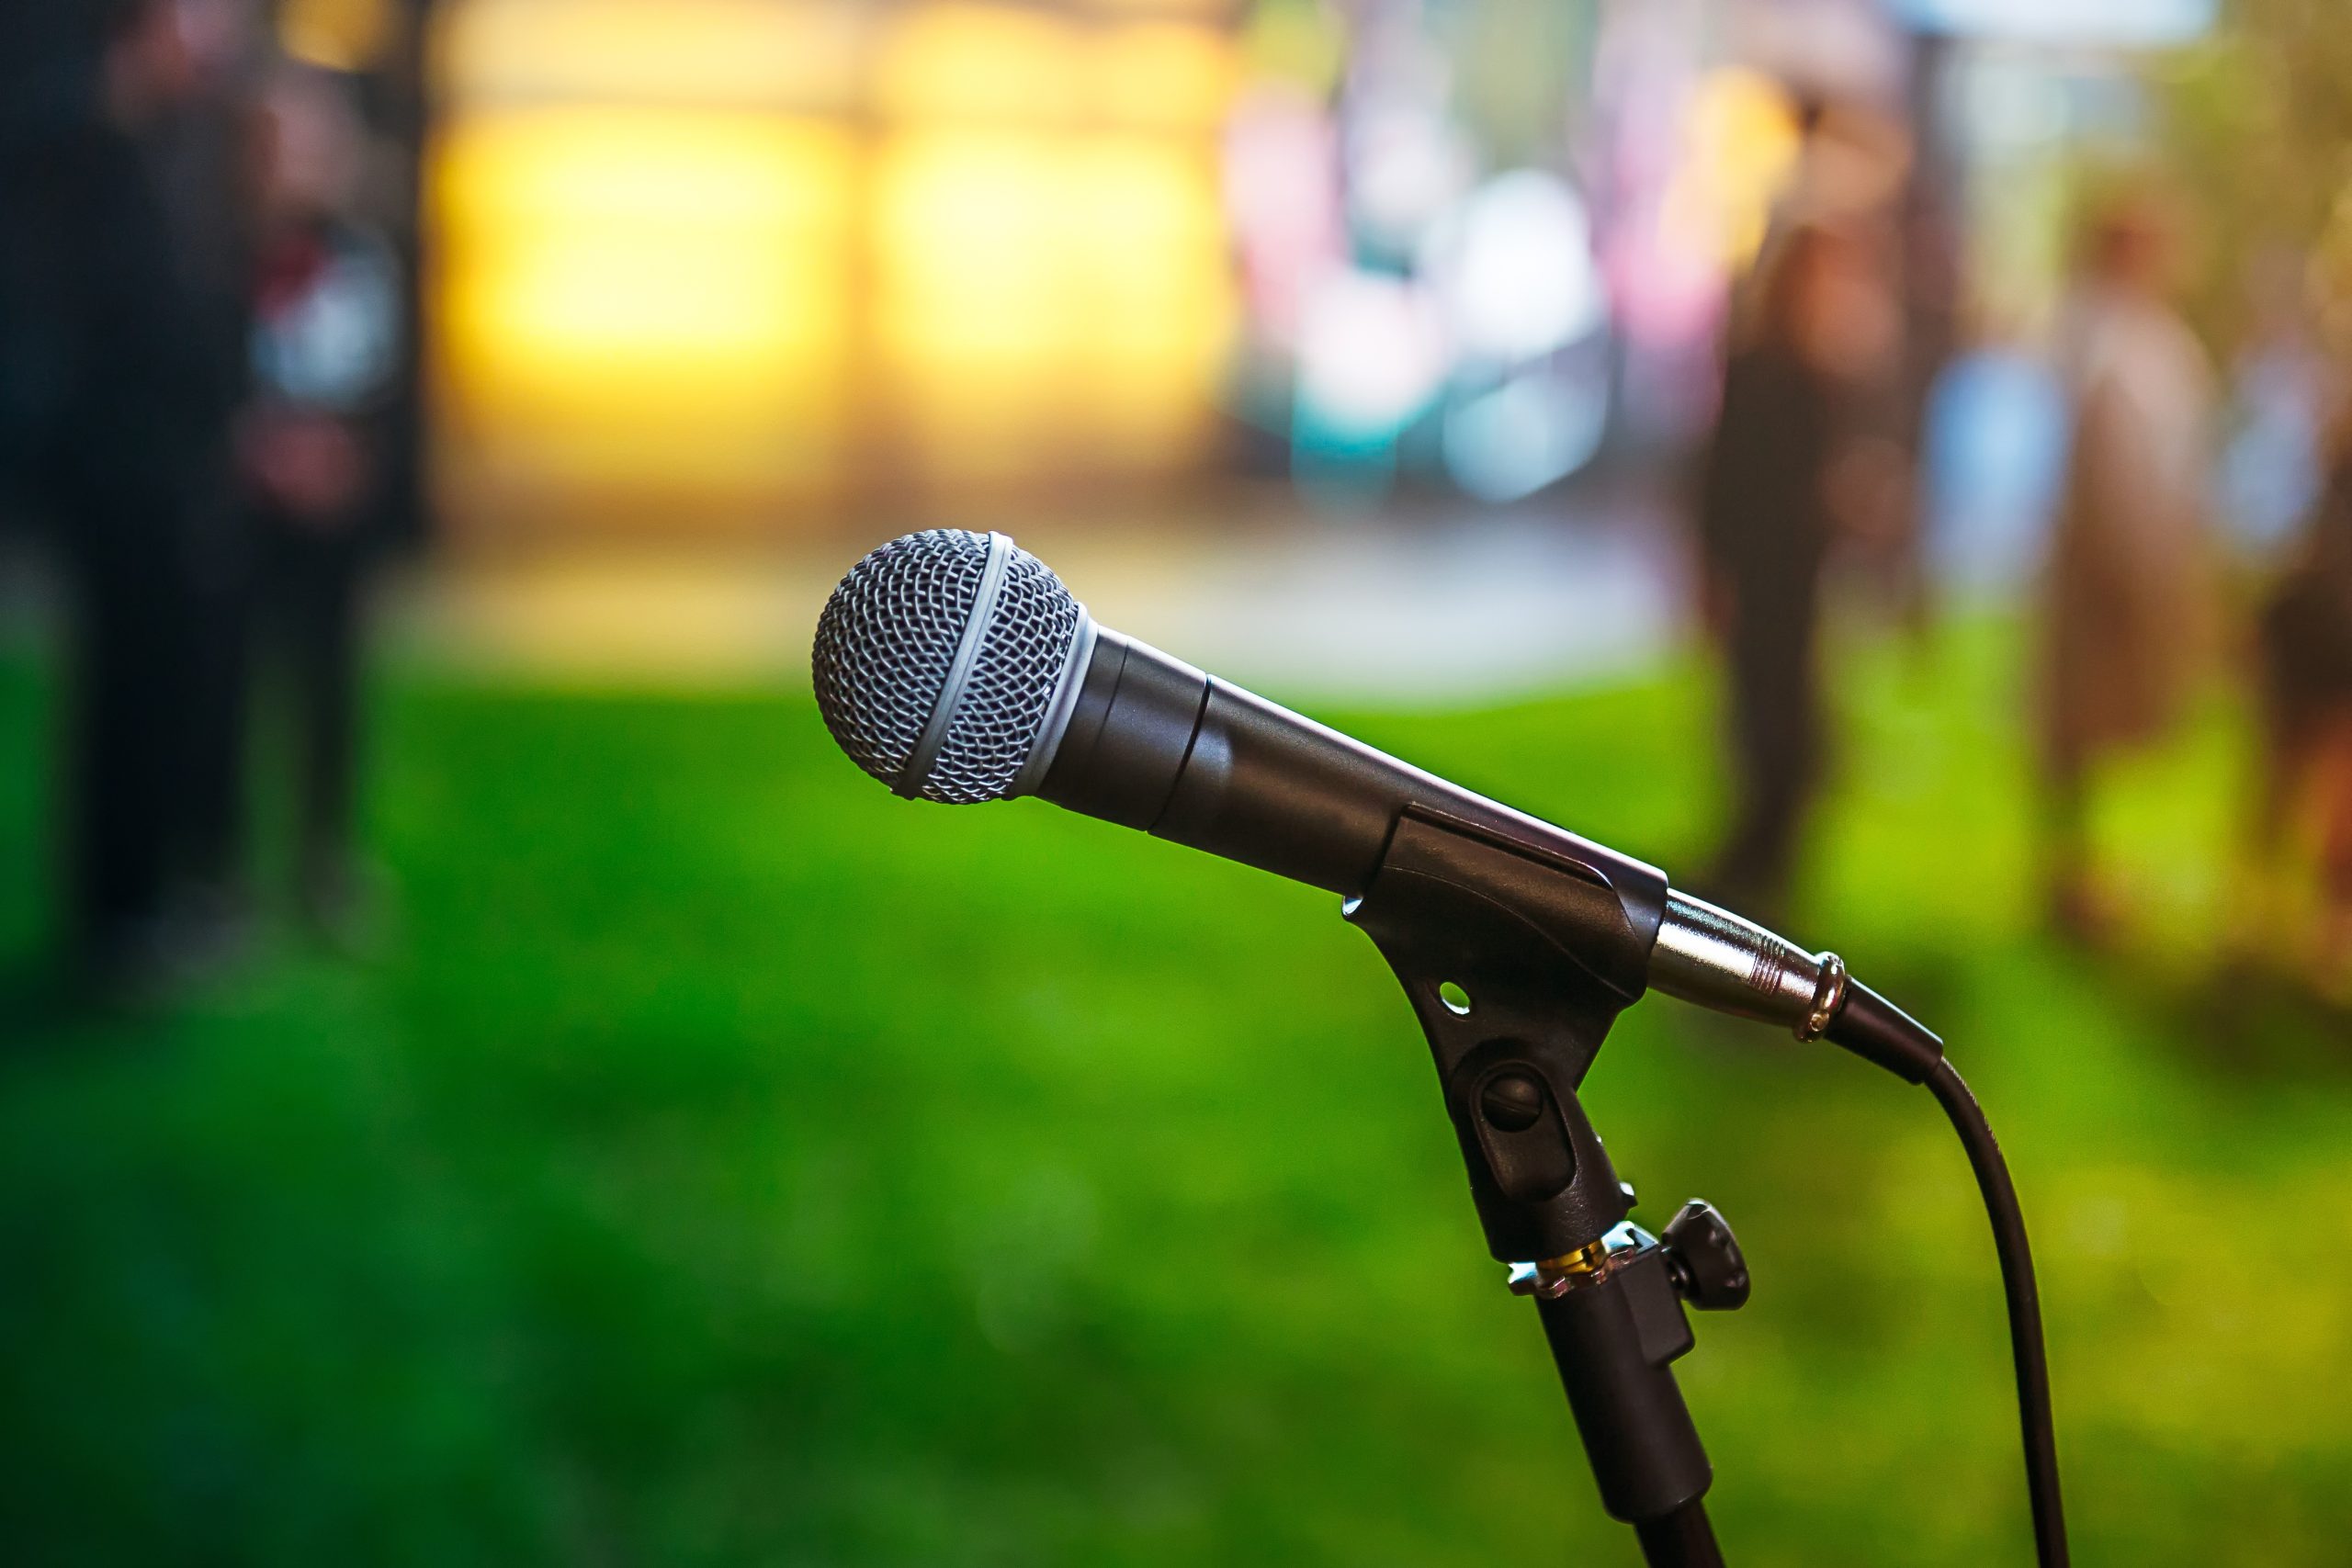 classic-microphone-on-abstract-blurred-bright-gree-2022-11-15-16-55-27-utc